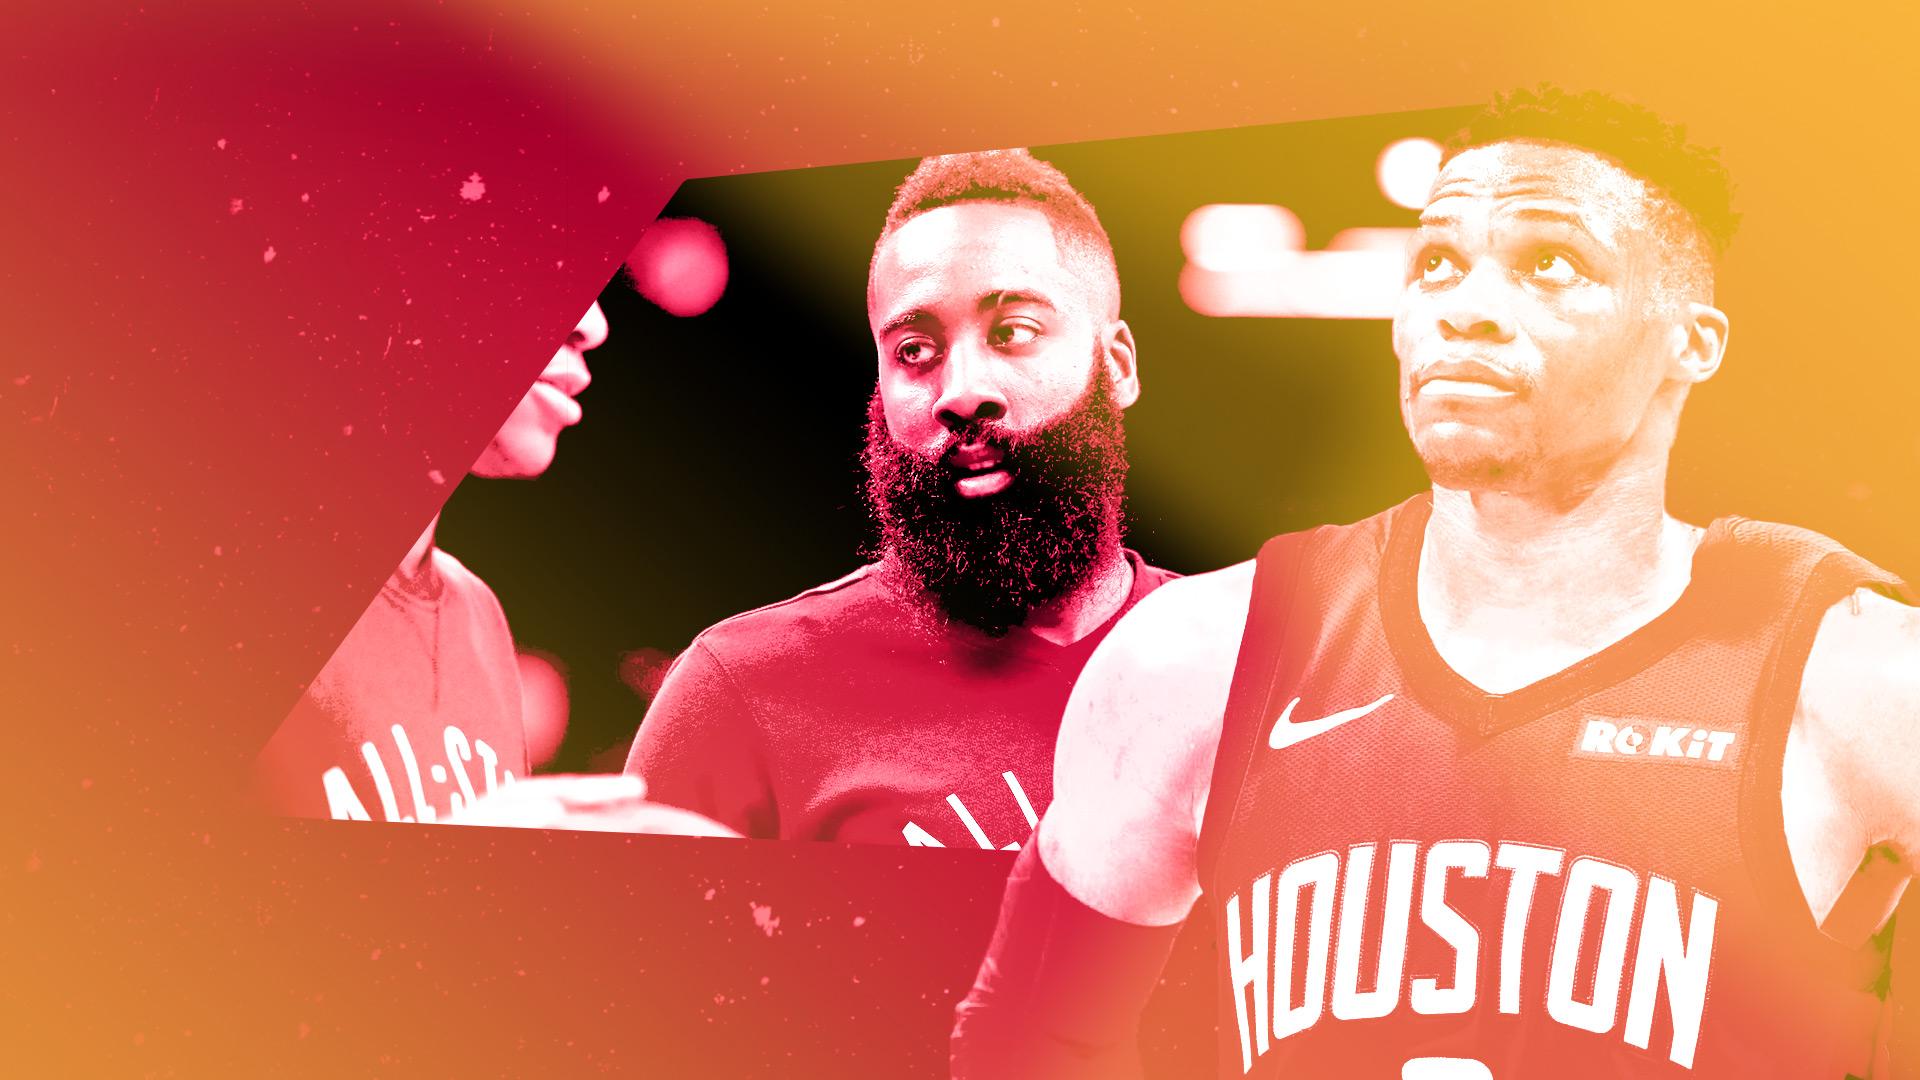 Russell Westbrook and the Houston Rockets. why not?